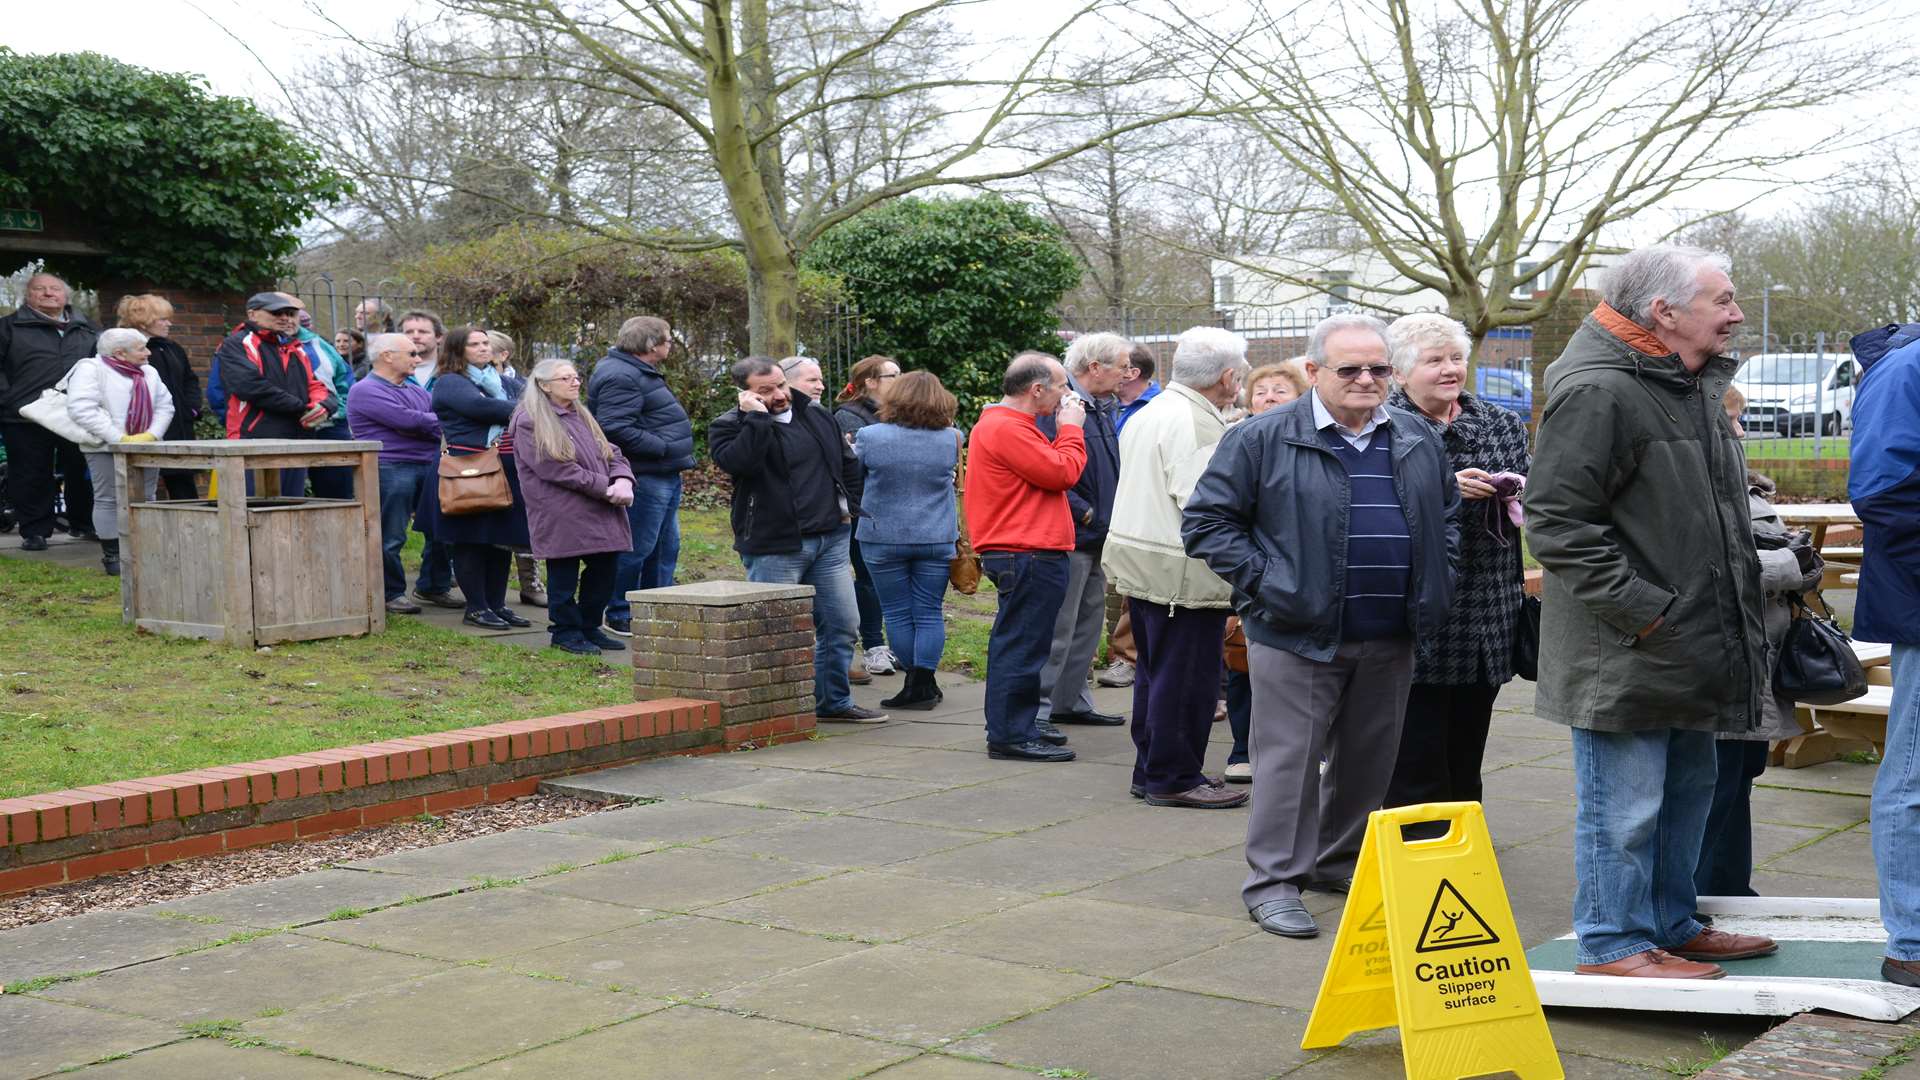 Residents queued to make their concerns heard at meetings and exhibitions